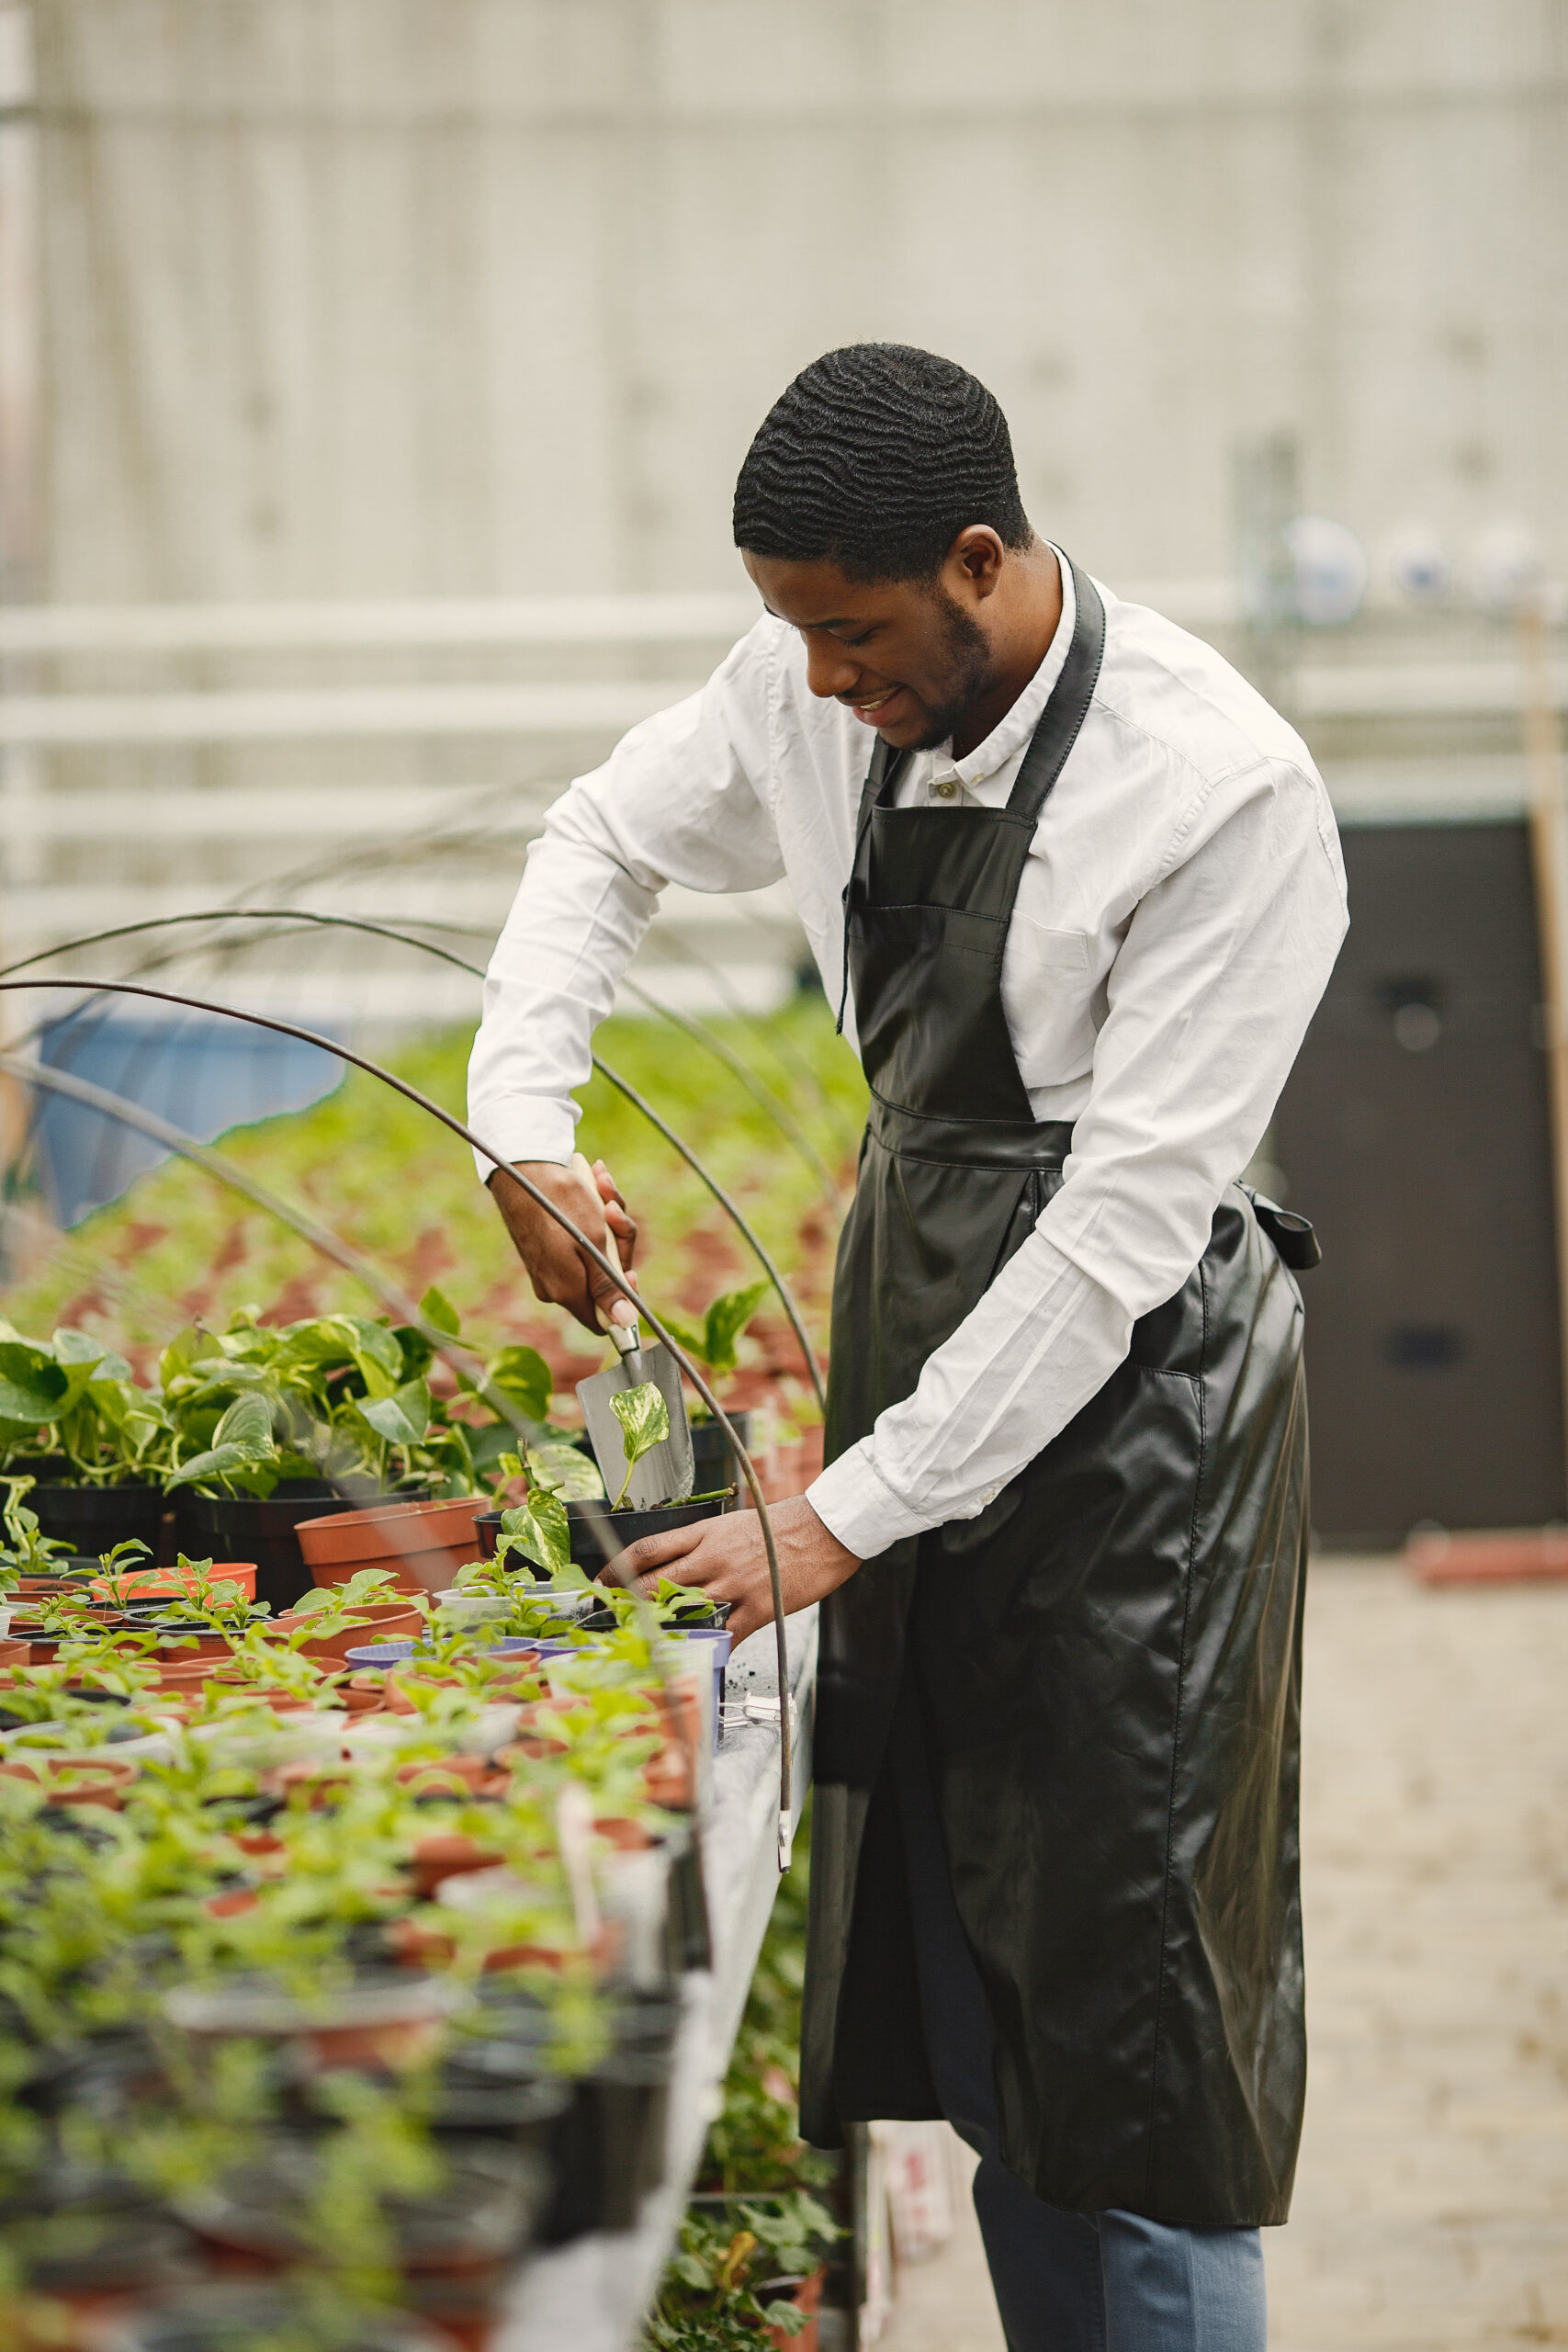 Gardener in an apron. African guy in a greenhouse. Flowers in a pot.